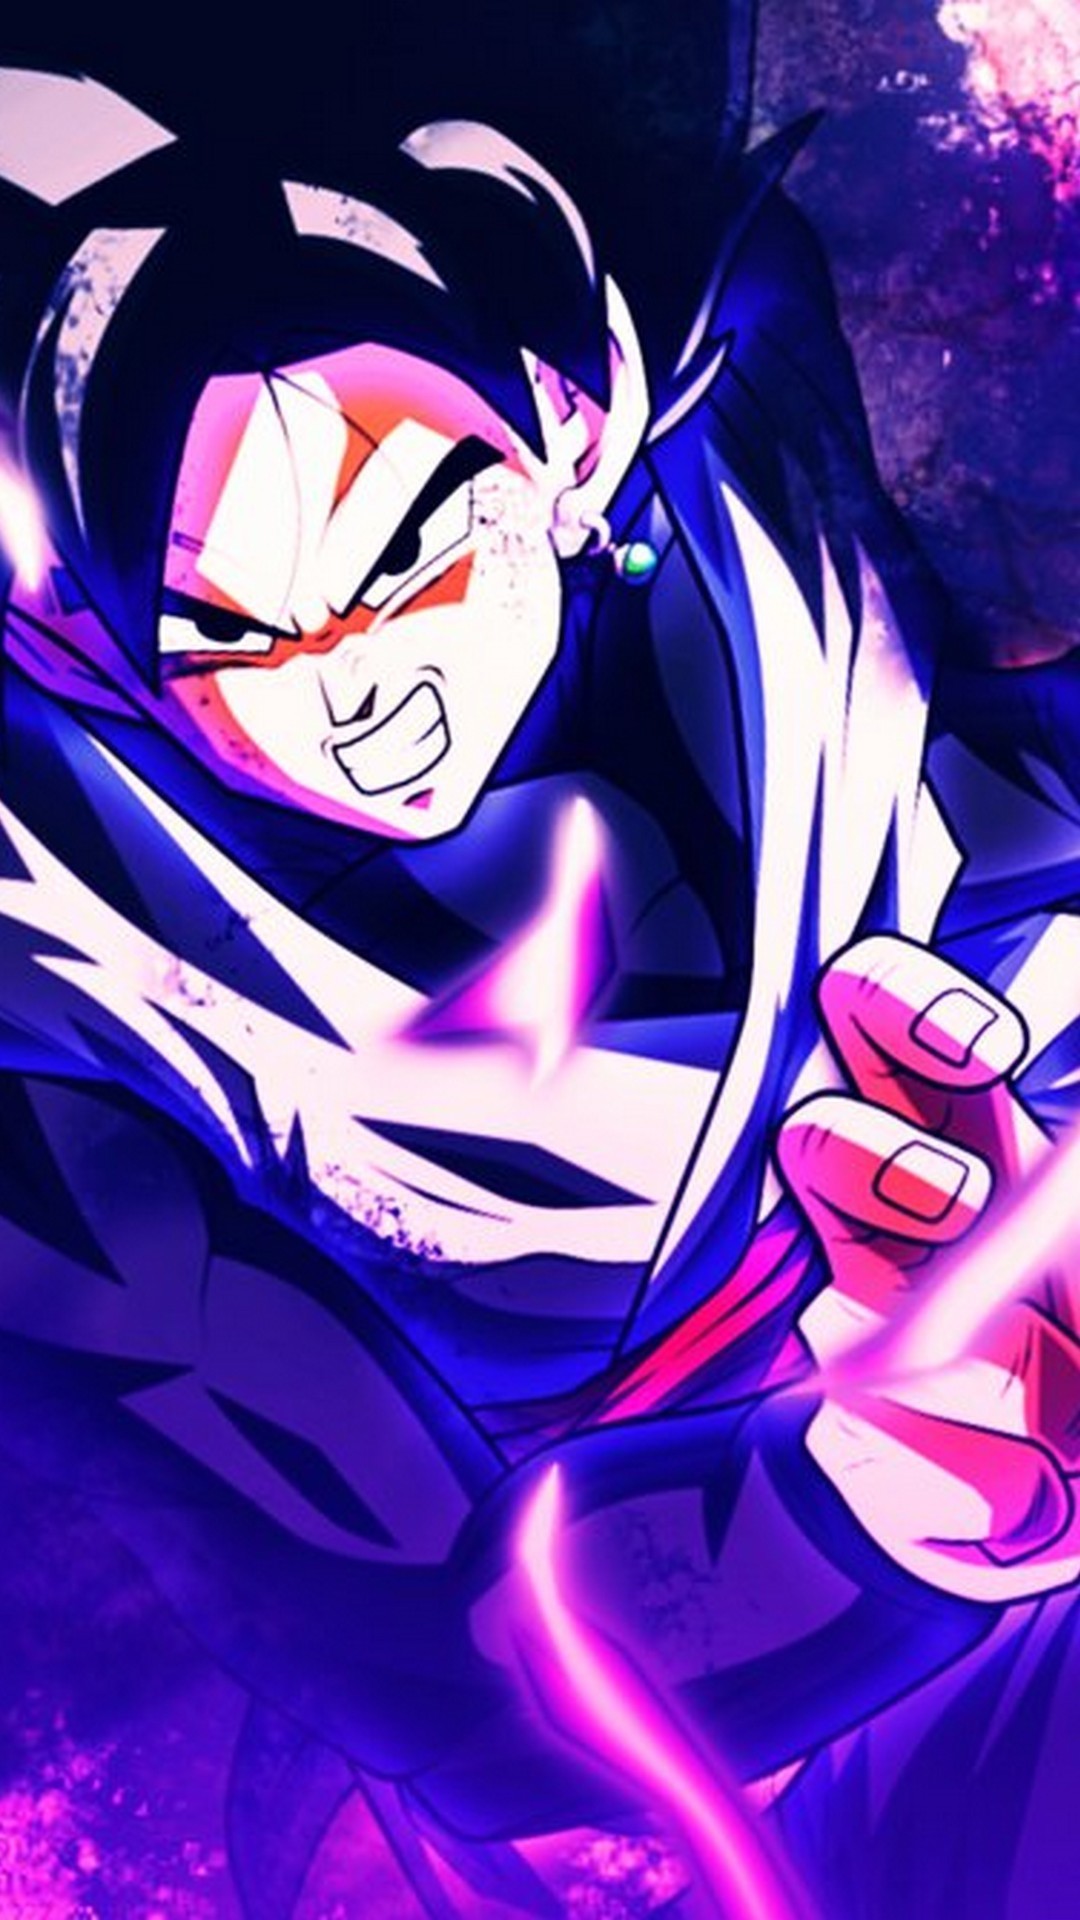 Wallpaper Black Goku iPhone with image resolution 1080x1920 pixel. You can make this wallpaper for your iPhone 5, 6, 7, 8, X backgrounds, Mobile Screensaver, or iPad Lock Screen